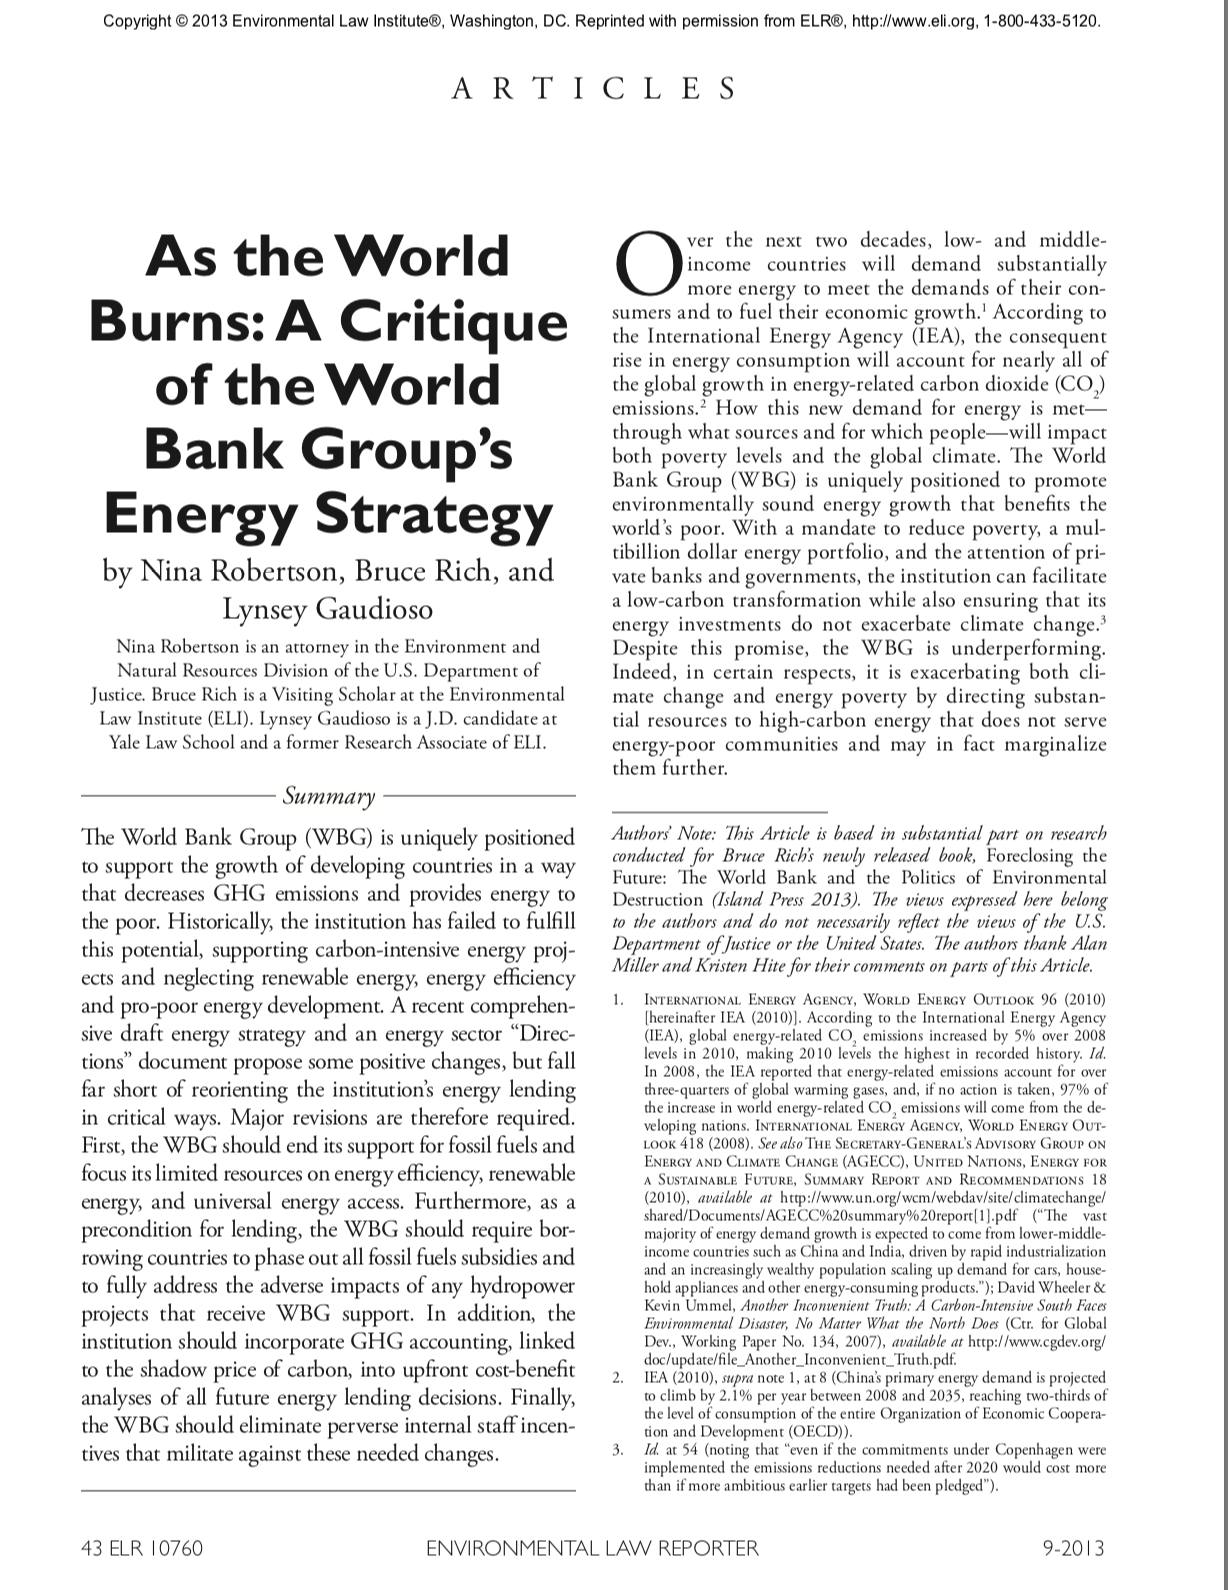 As the World Burns: A Critique of the World Bank Group's Energy Strategy